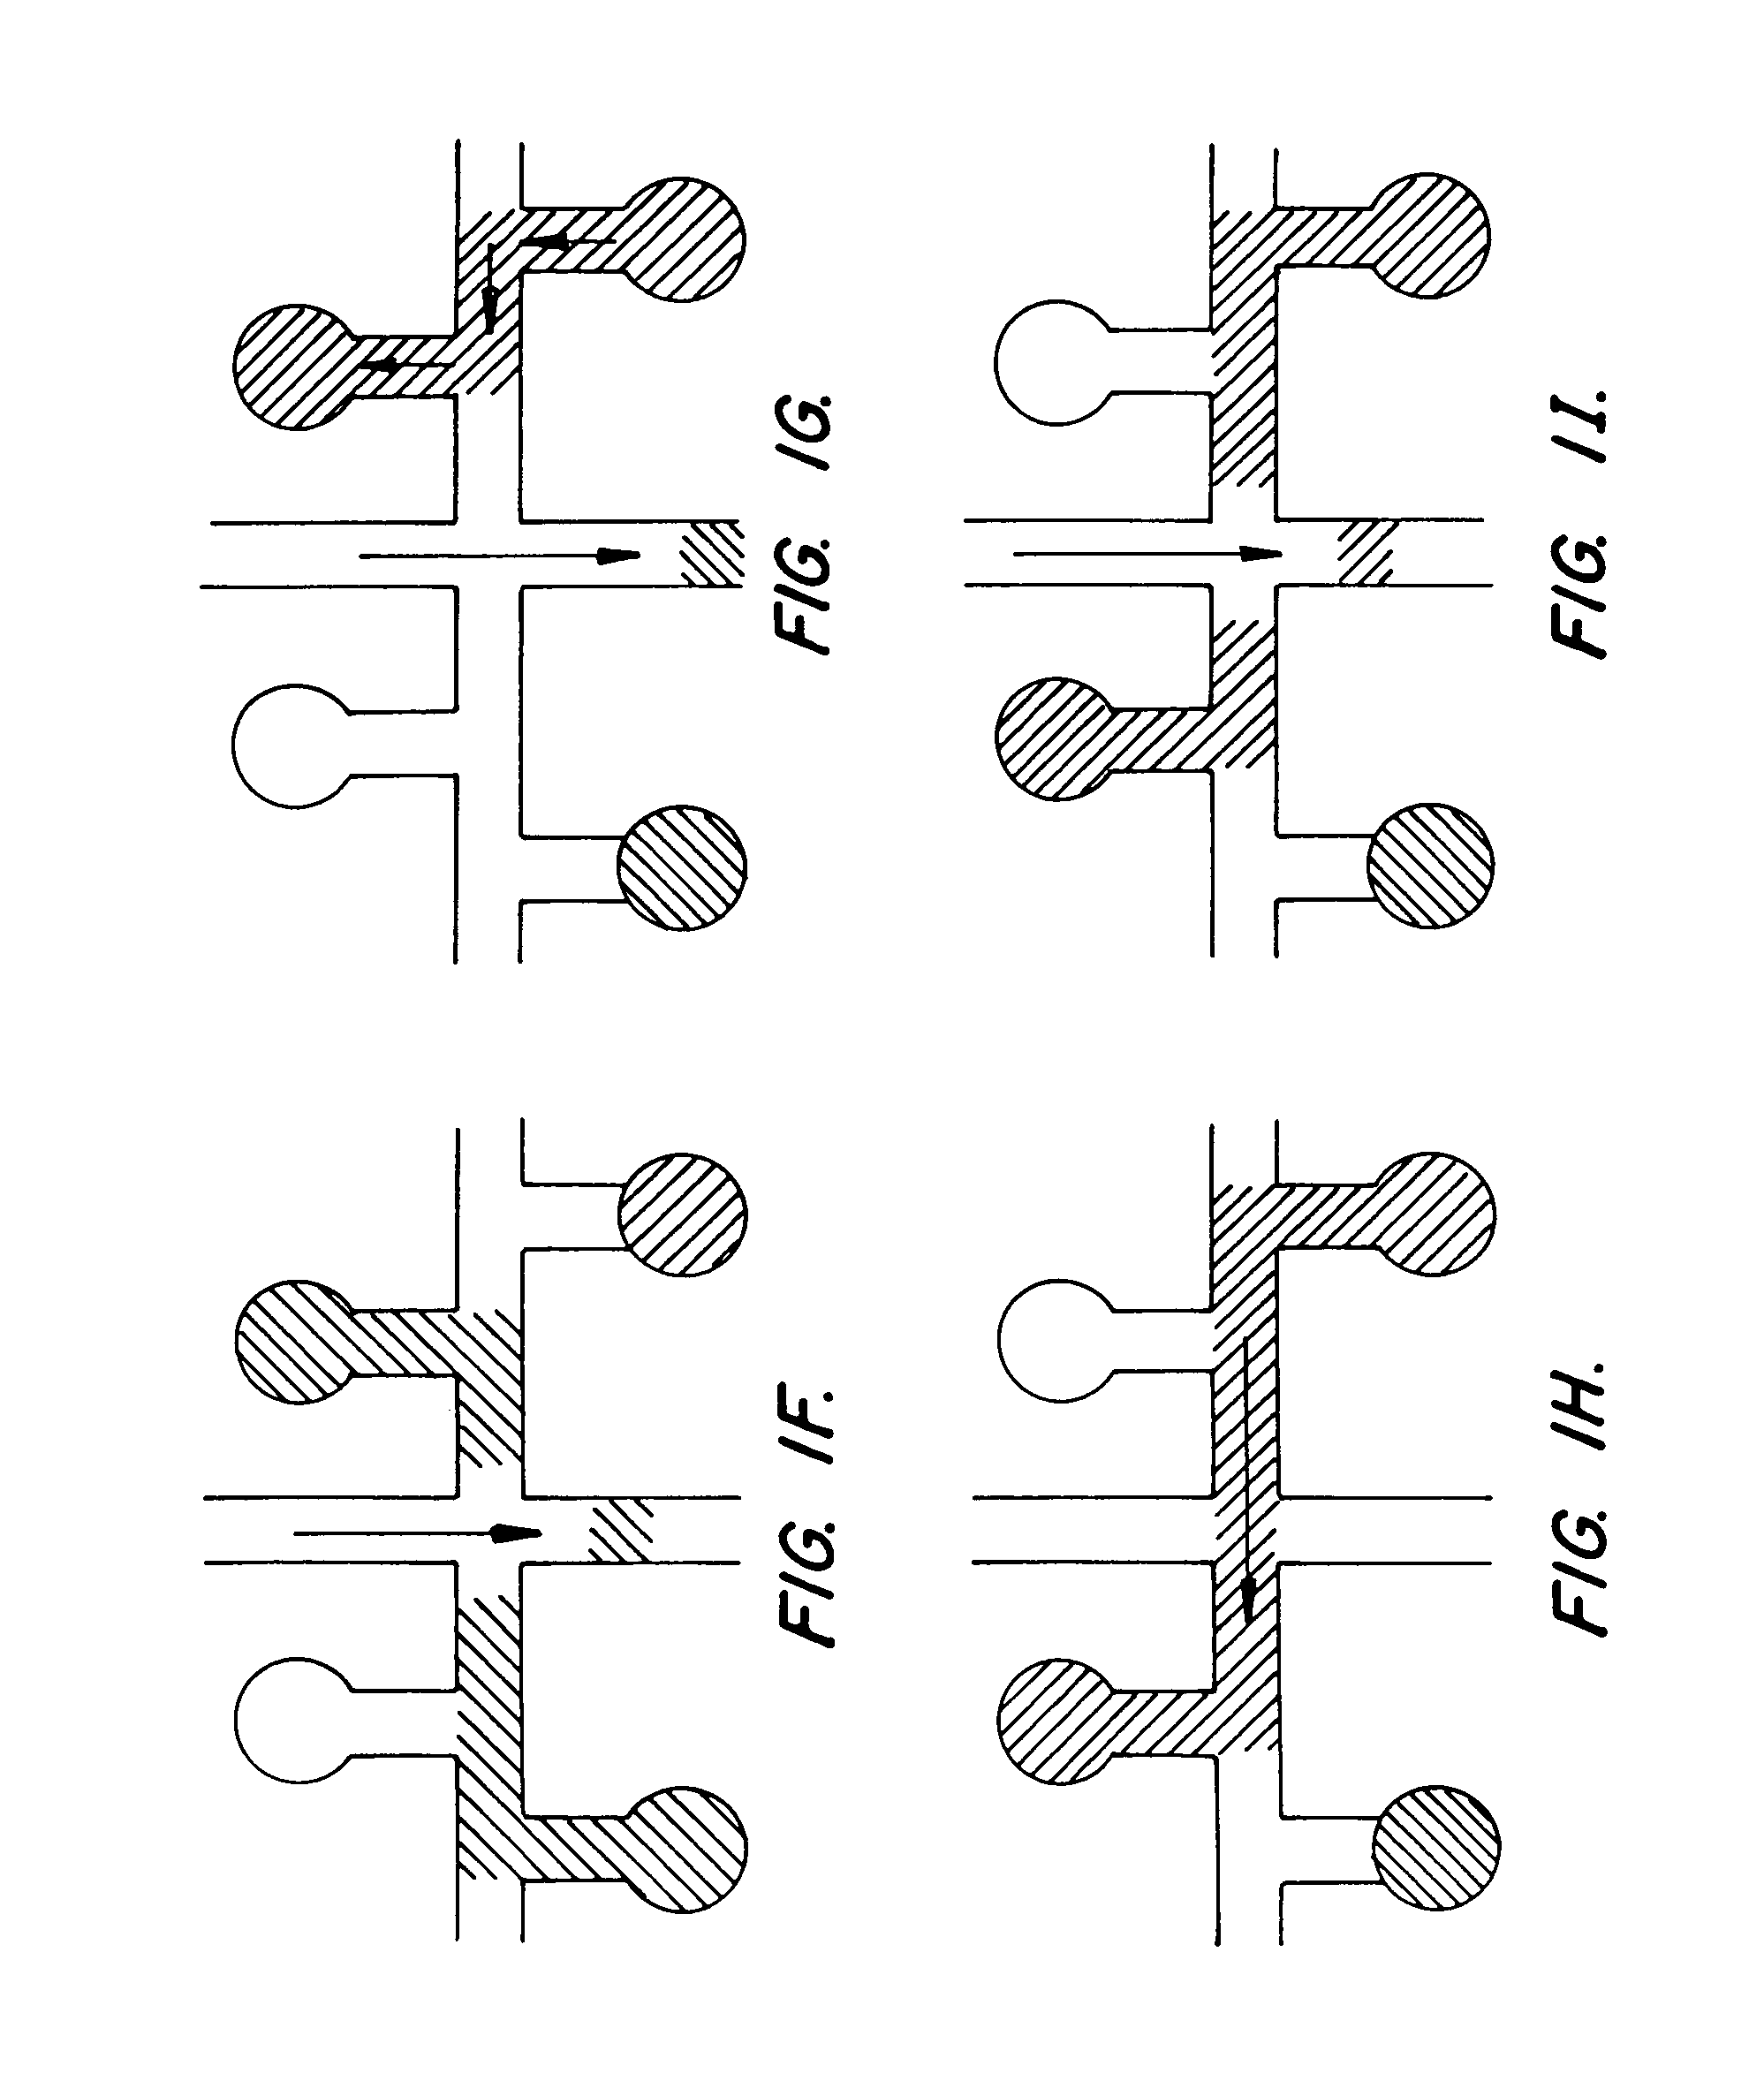 Microfluidic devices incorporating improved channel geometries